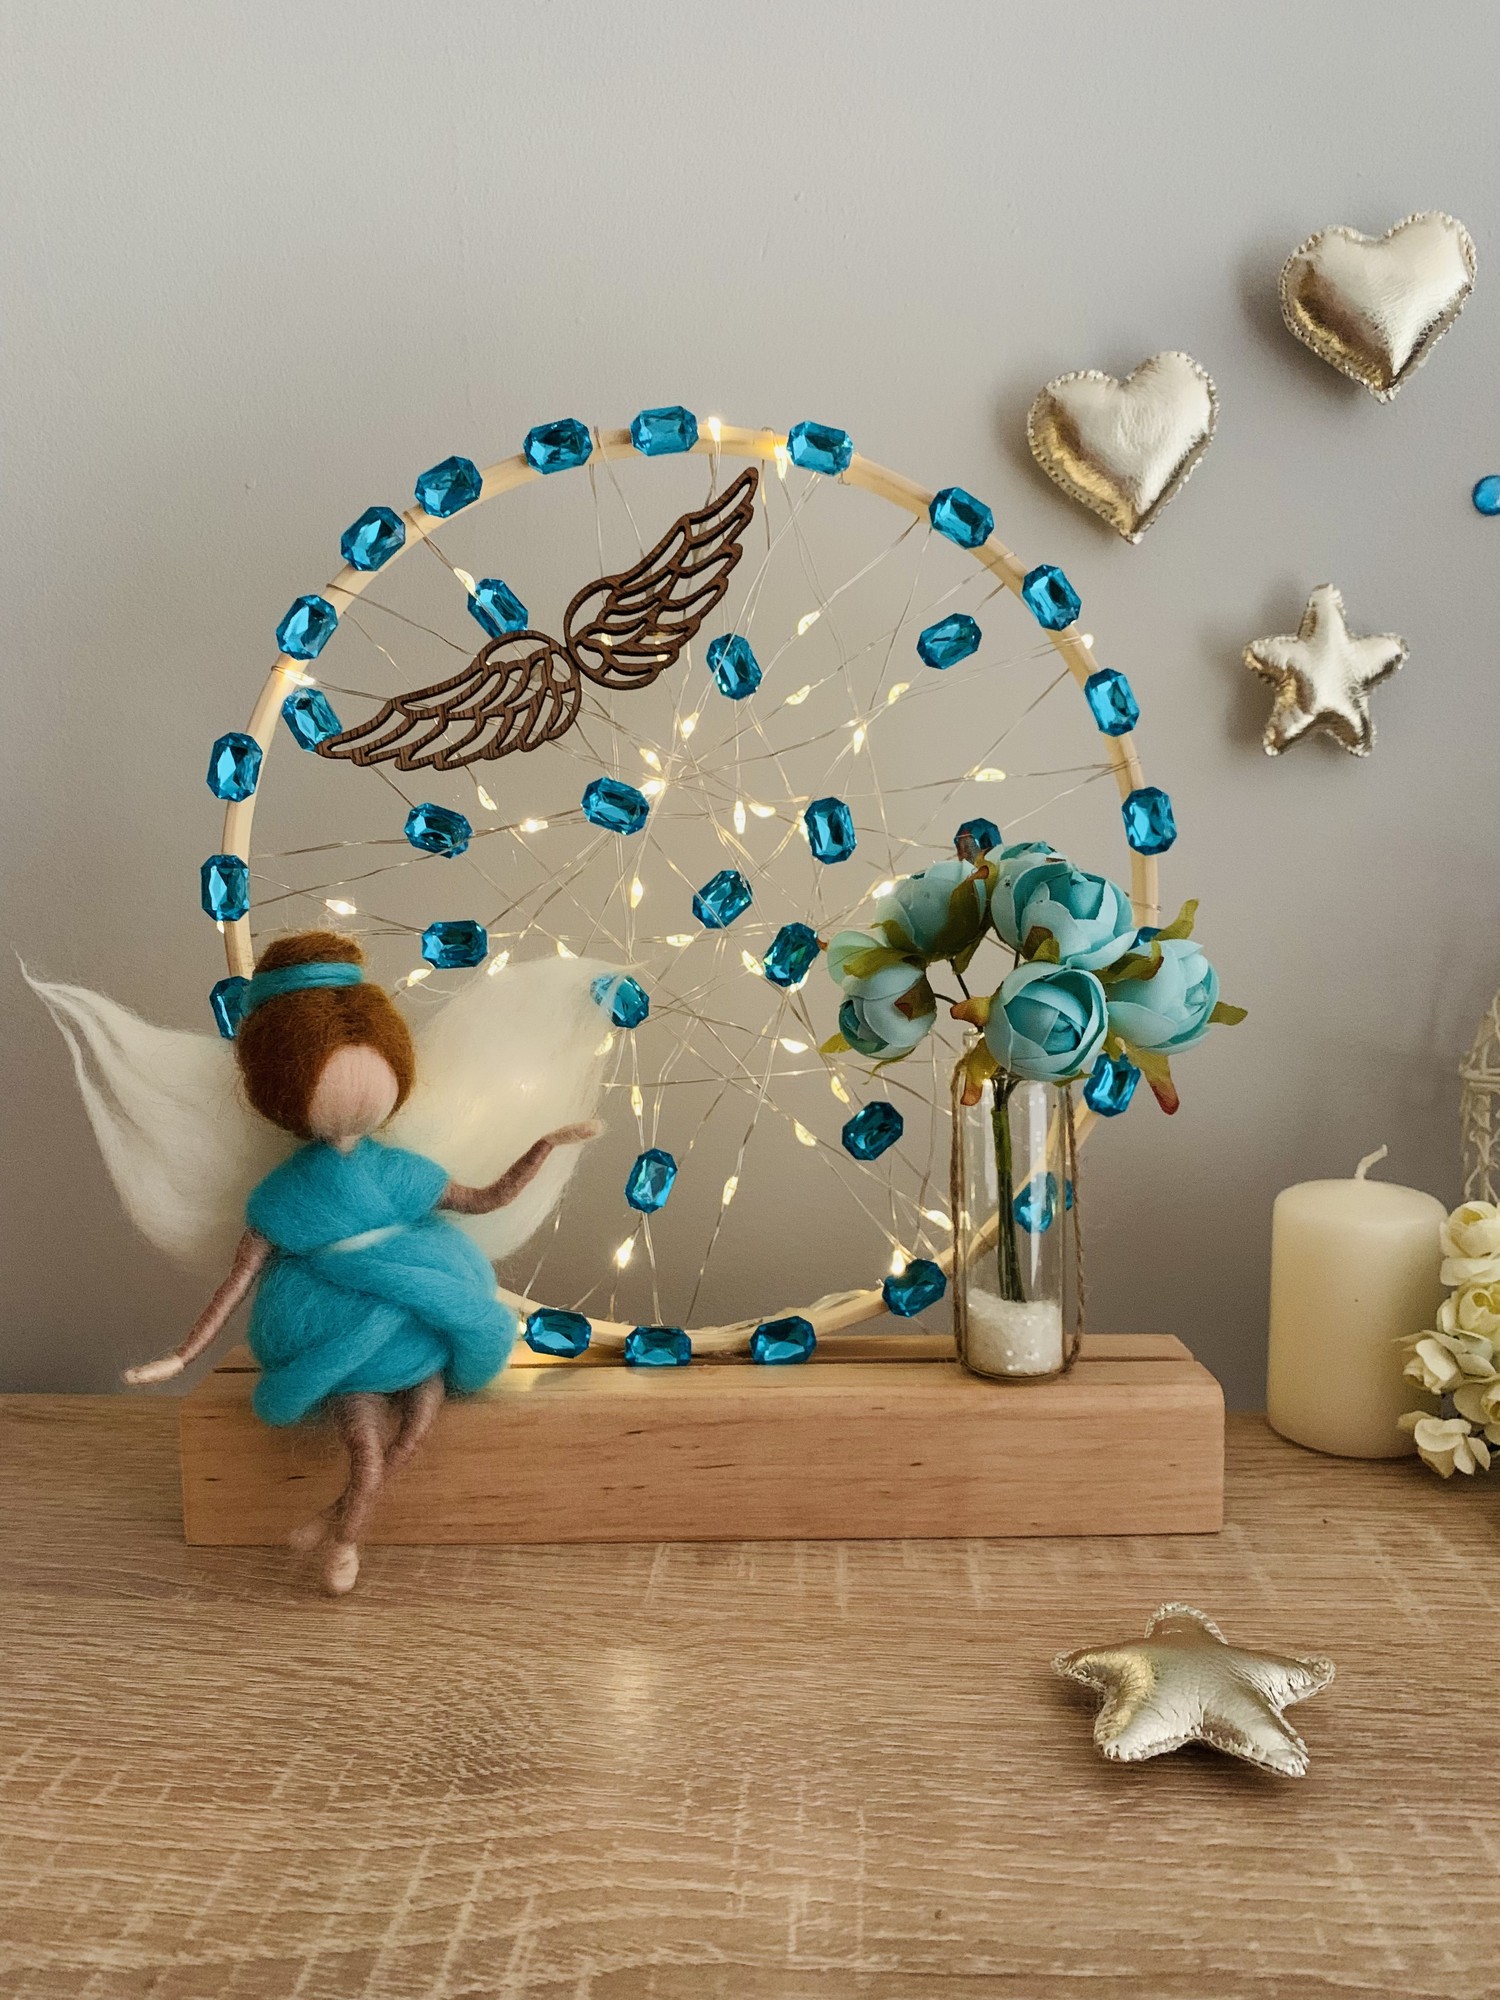 A lamp with a blue angel and flowers, room decor, room lighting